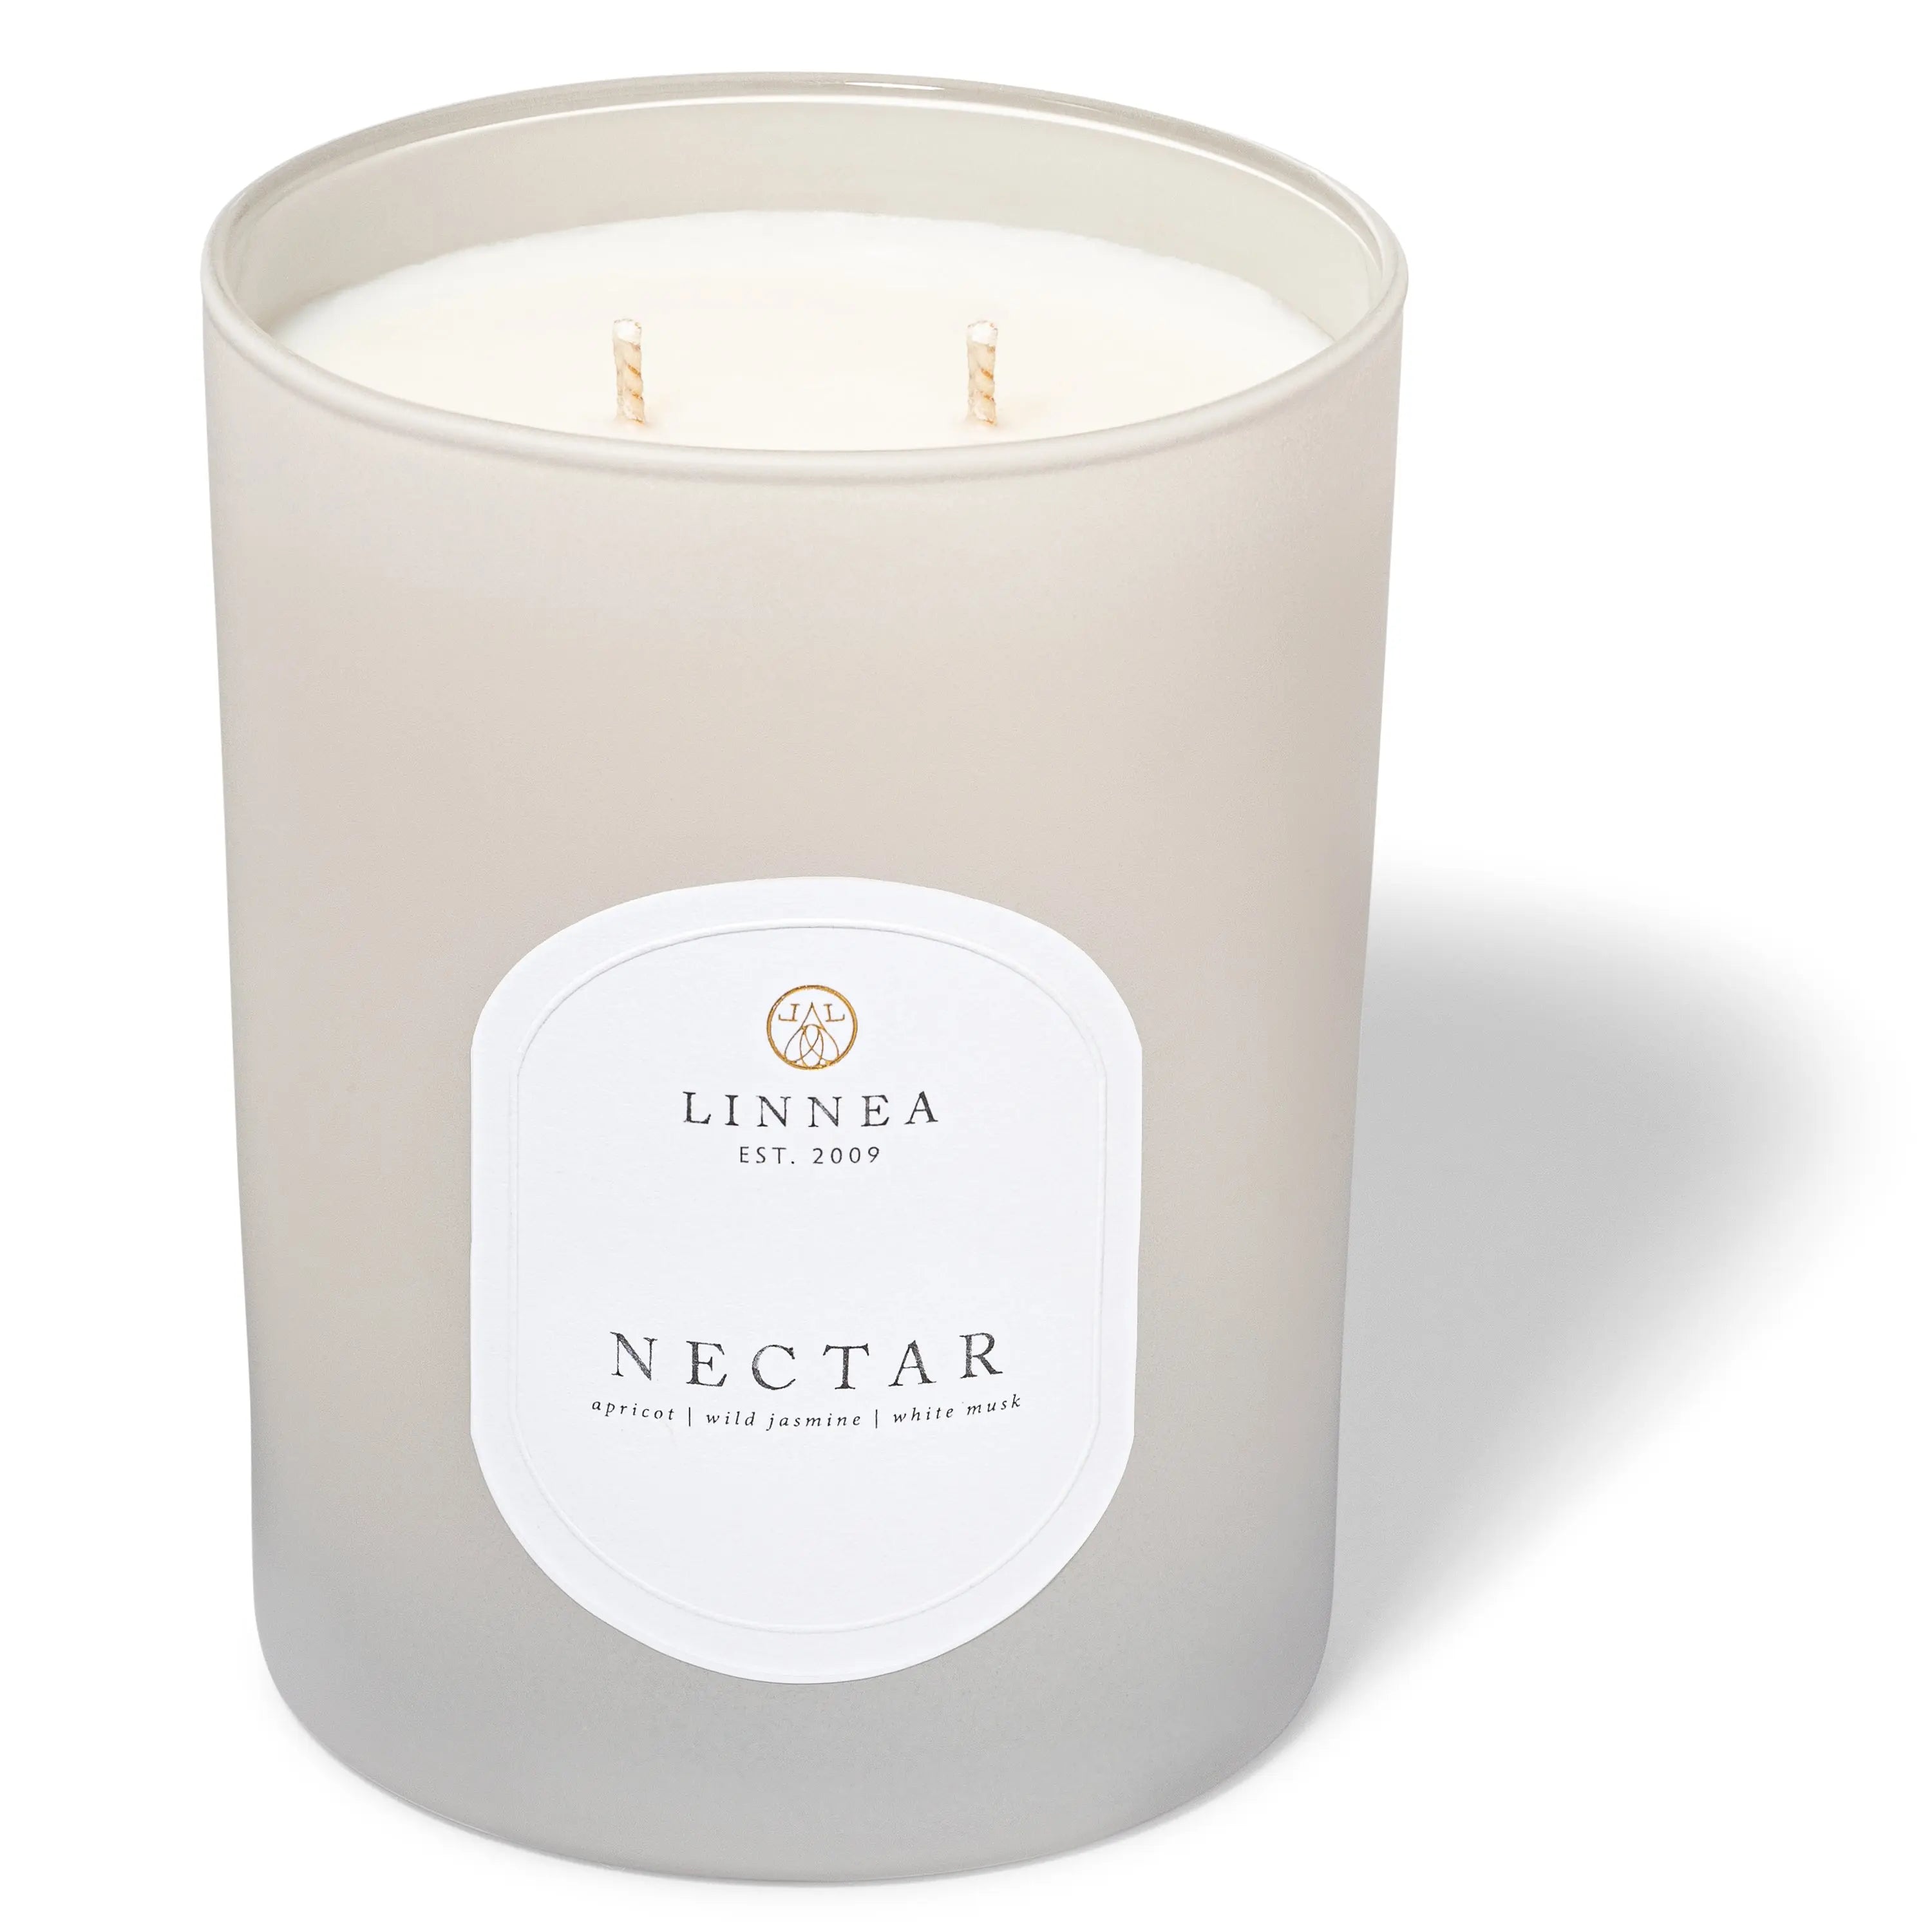 LINNEA Scented Candle in Nectar - Home Smith